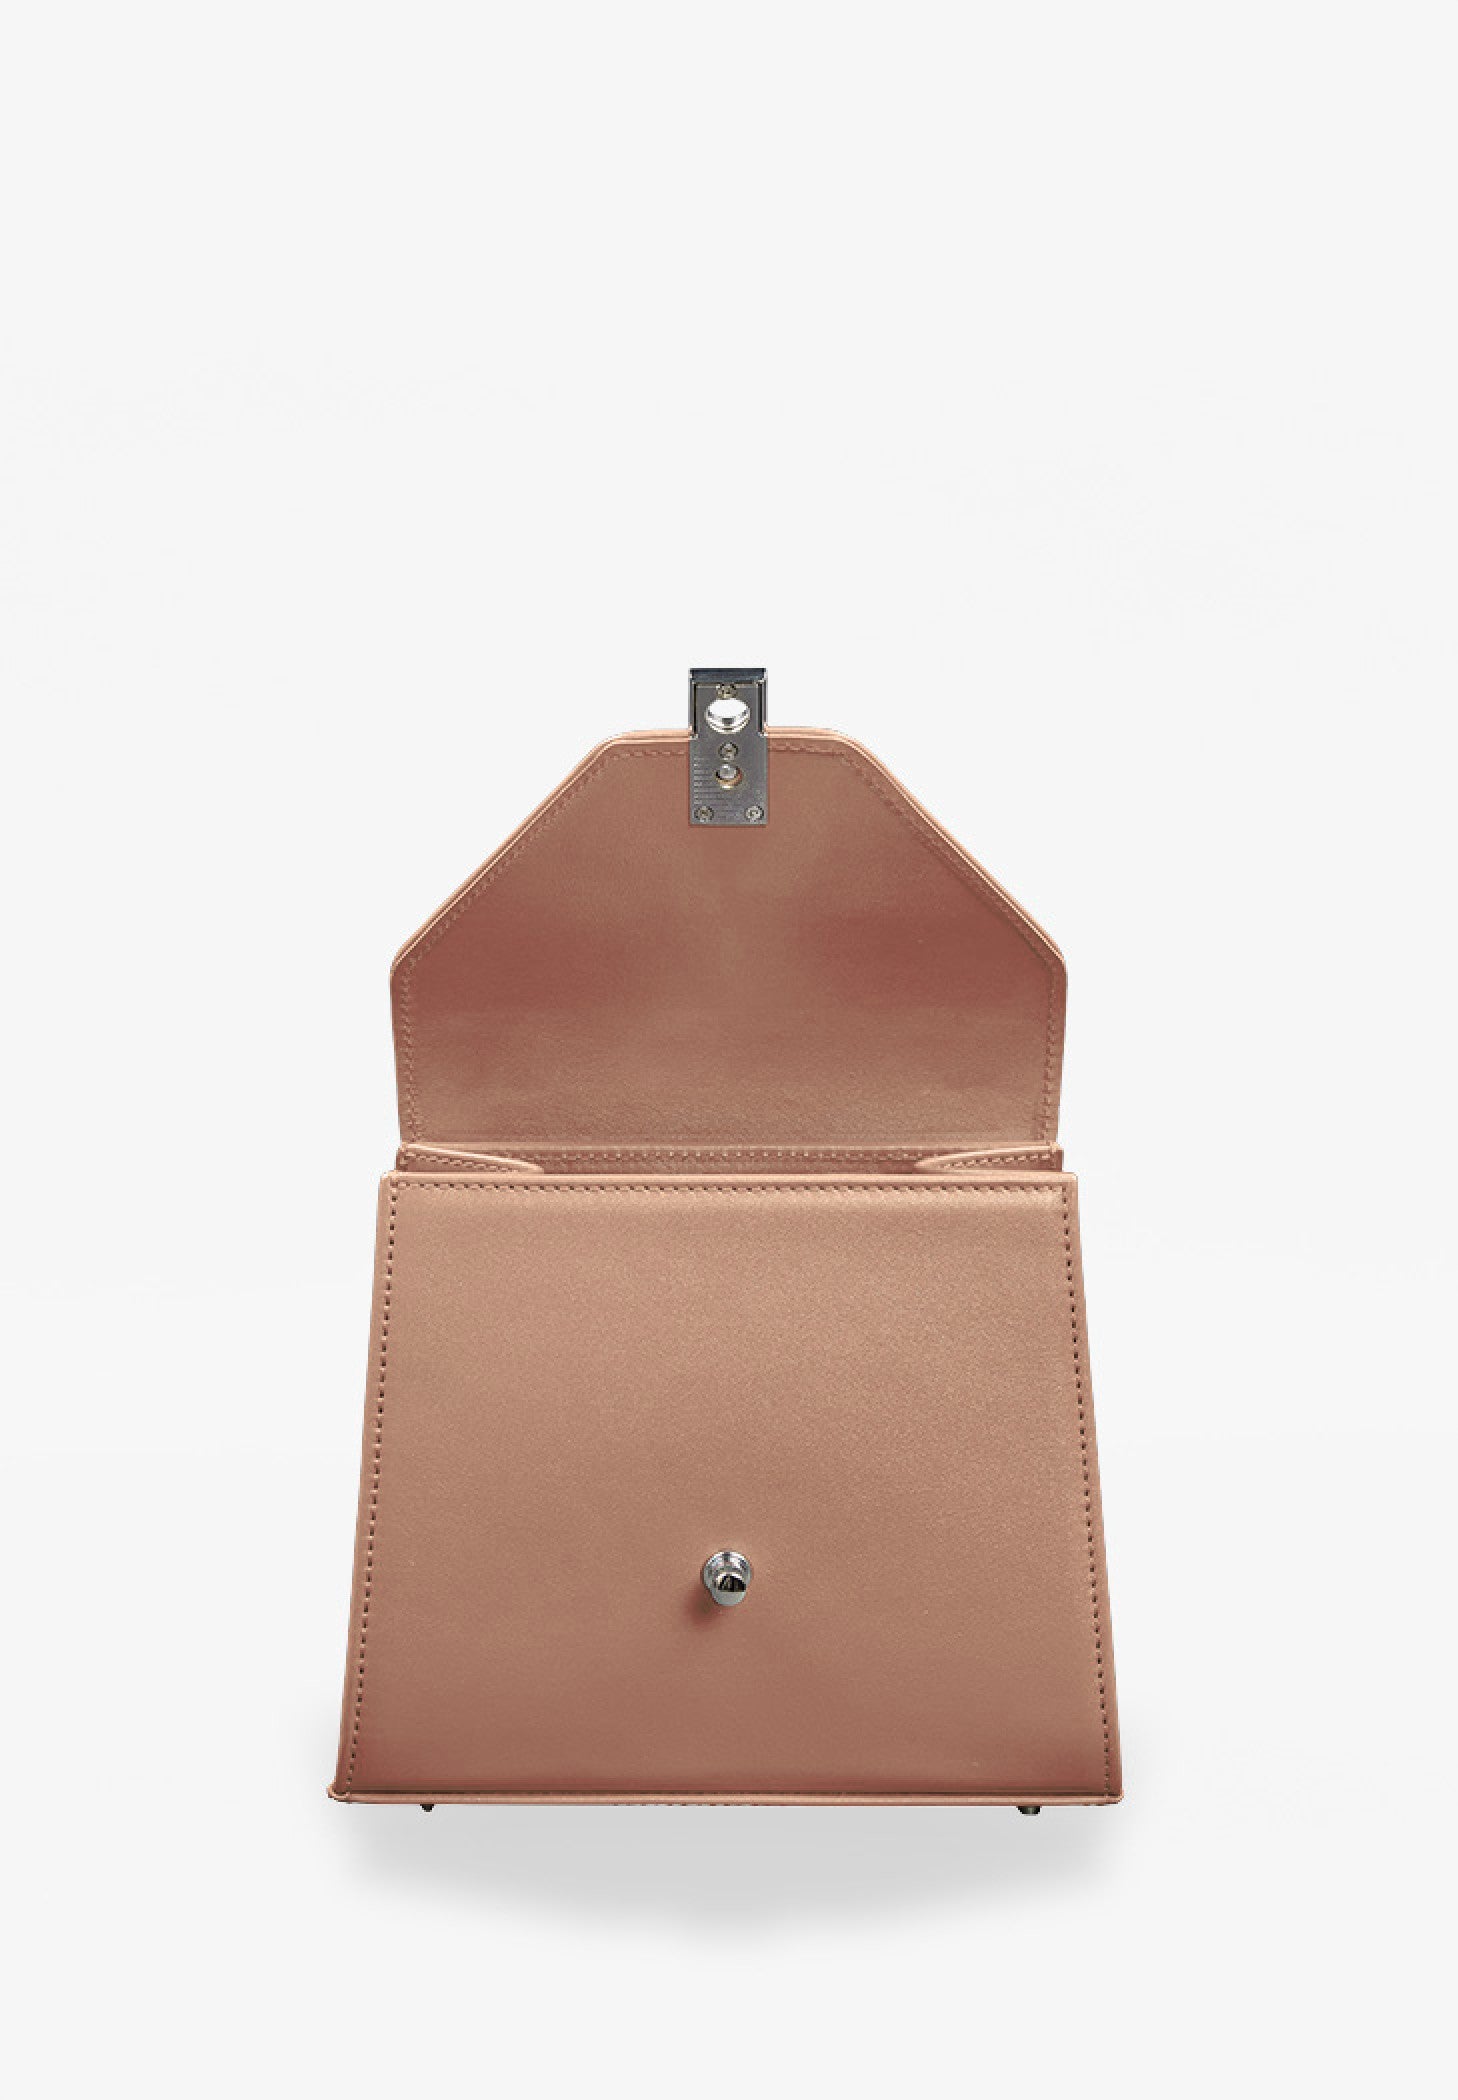 leather medium sized bag for women in caramel color on a white background